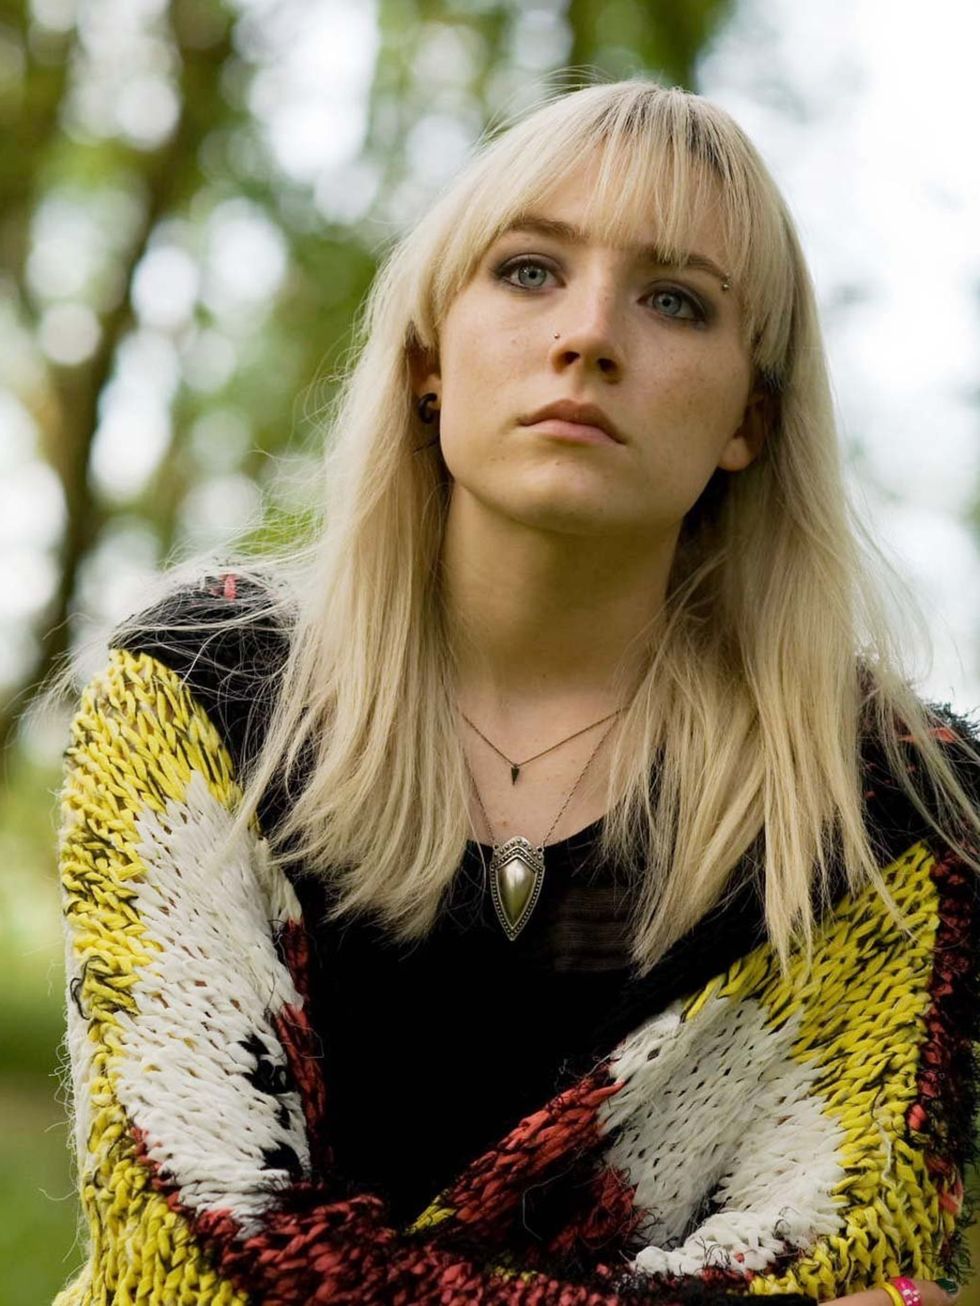 <p><strong>How I Live Now</strong></p><p>Rising star <a href="http://www.elleuk.com/star-style/celebrity-style-files/ones-to-watch-2013">Saoirse Ronan</a> stars in Kevin MacDonalds coming of age film adapted from Meg Rossoff's dystopian drama. In a nutsh